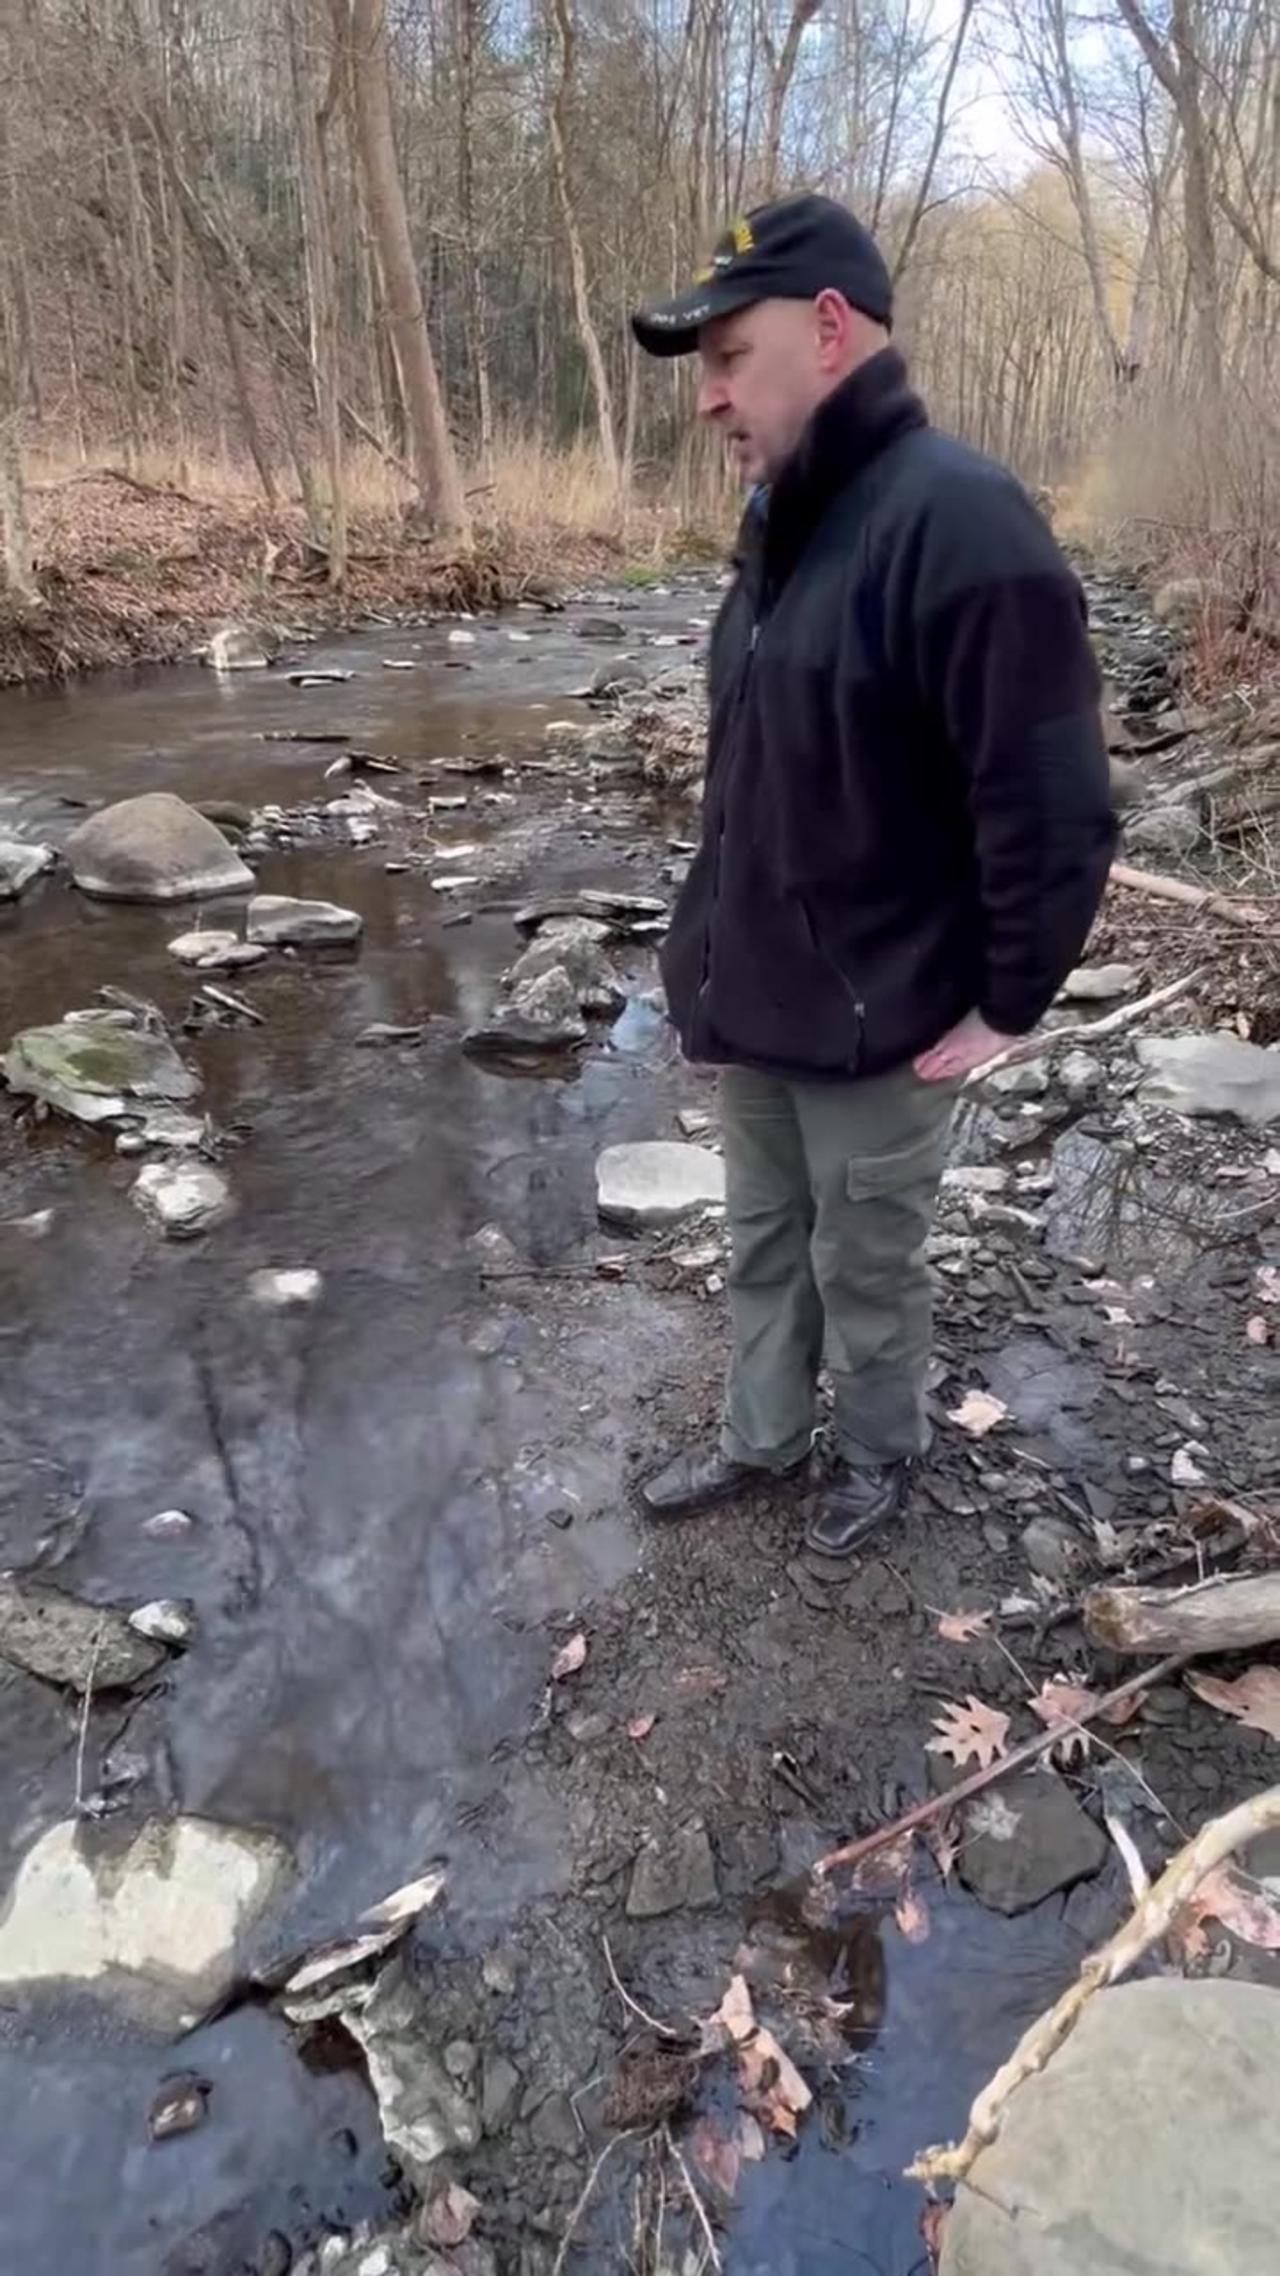 Doug Mastriano in East Palestine, Ohio exposing chemicals in the water not visited by Biden